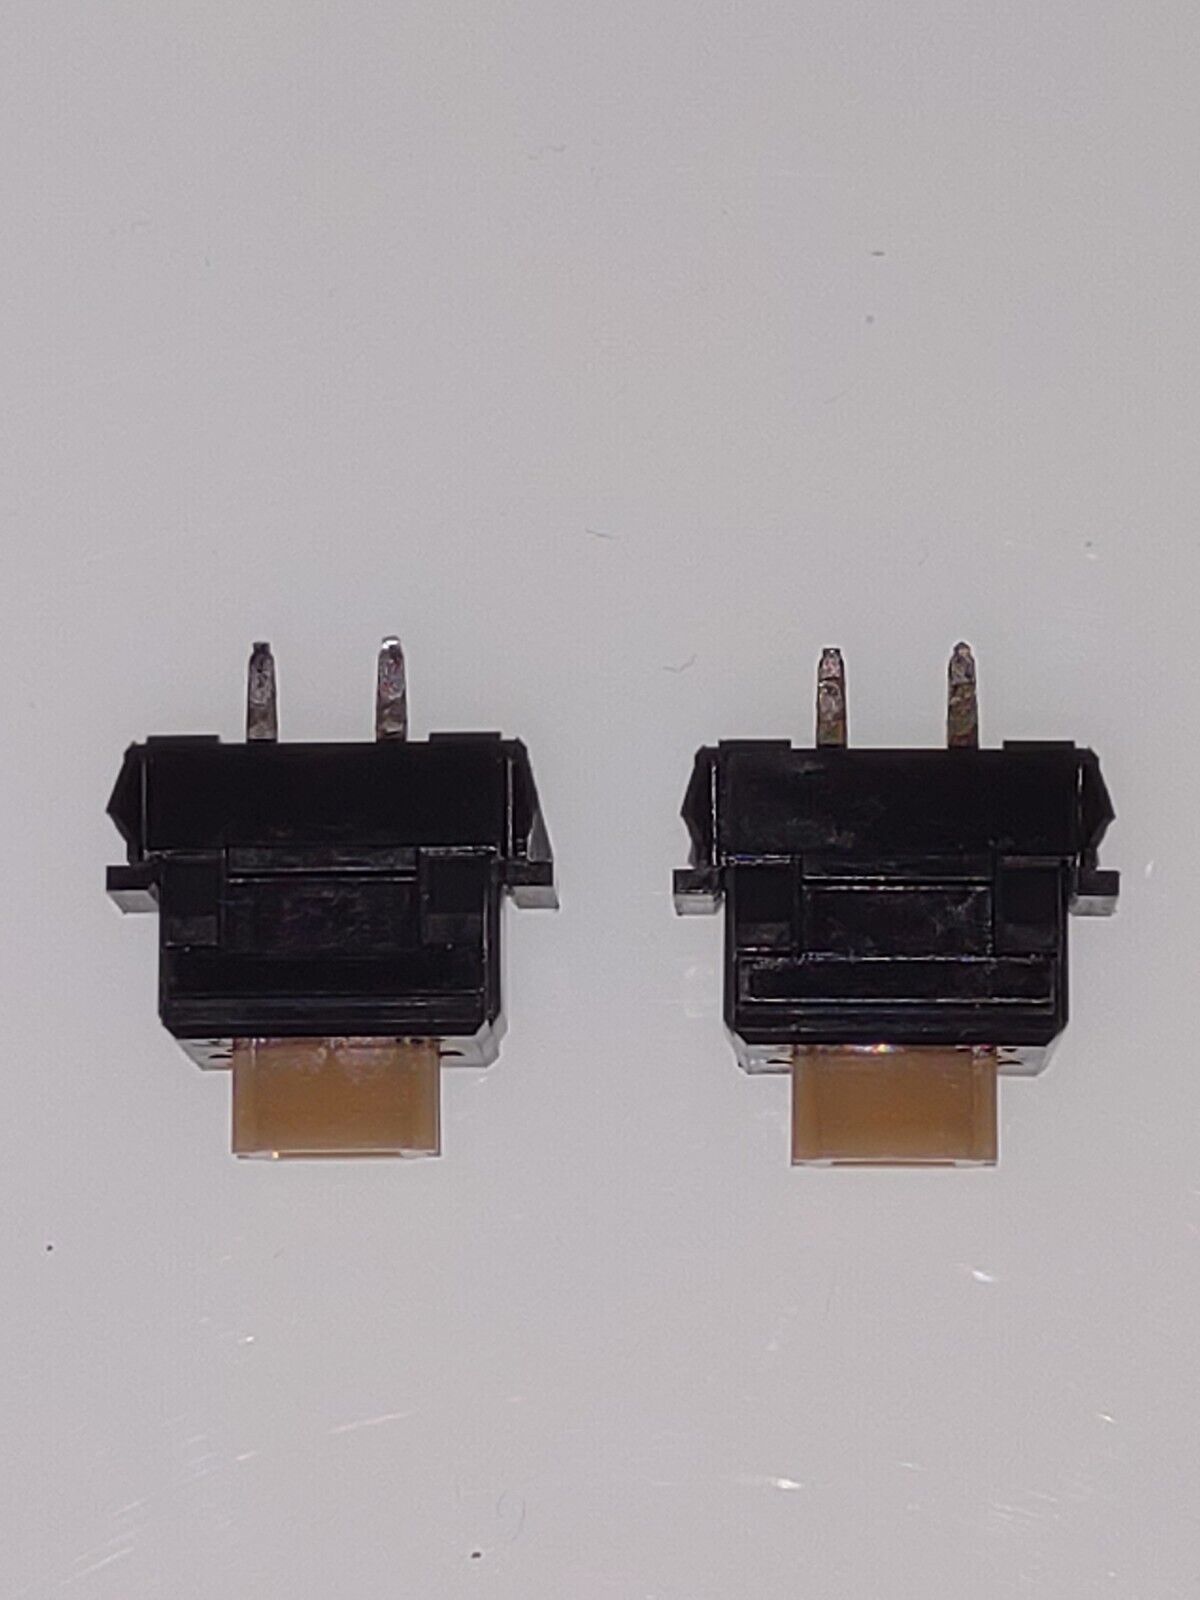 Apple Alps Keyboard Key Switch Salmon Original Replacement Vintage USED 2 Count